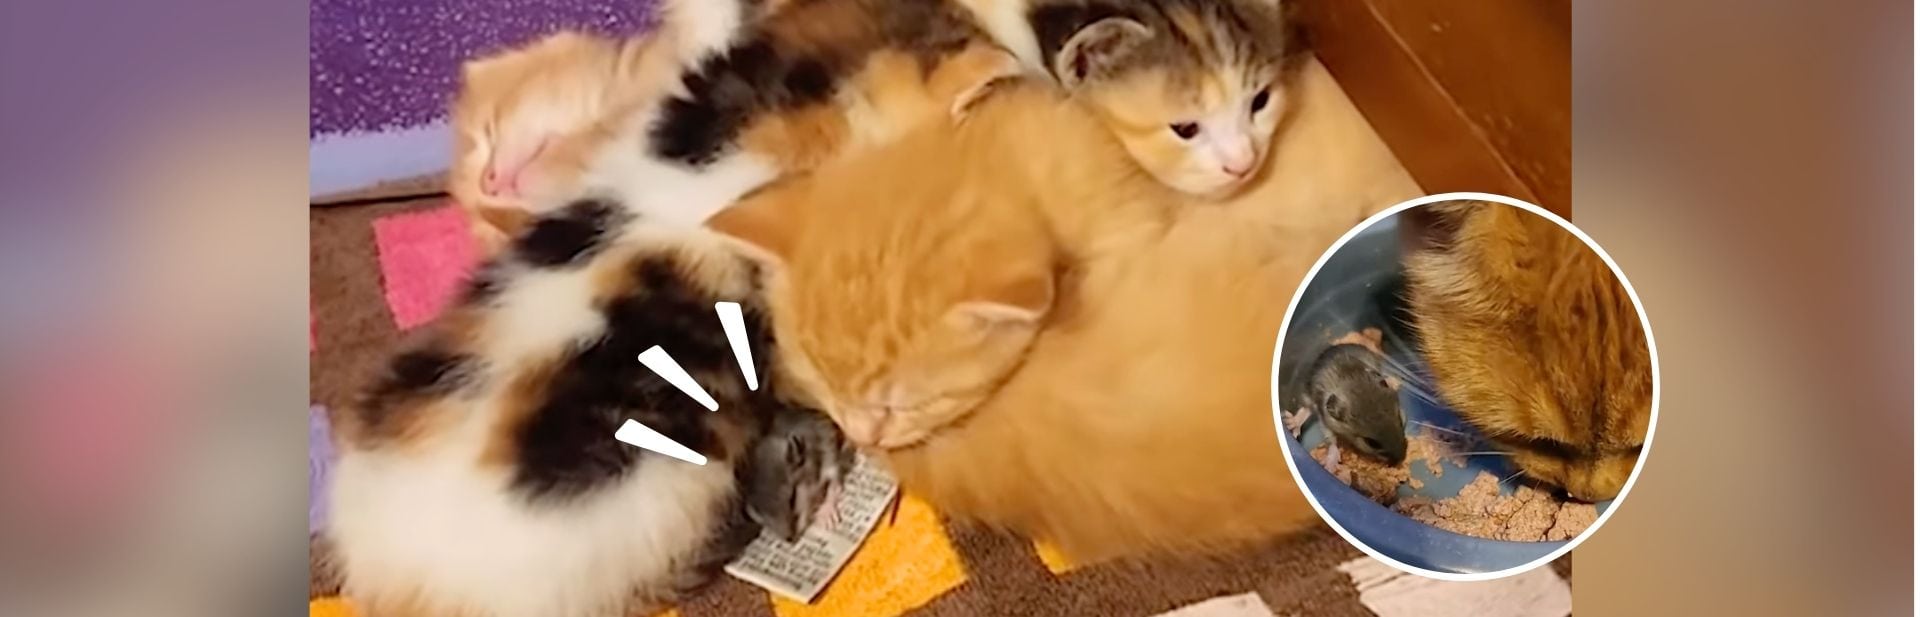 Mama Cat Defies Nature by Adopting a Tiny and Squeaky New Family Member